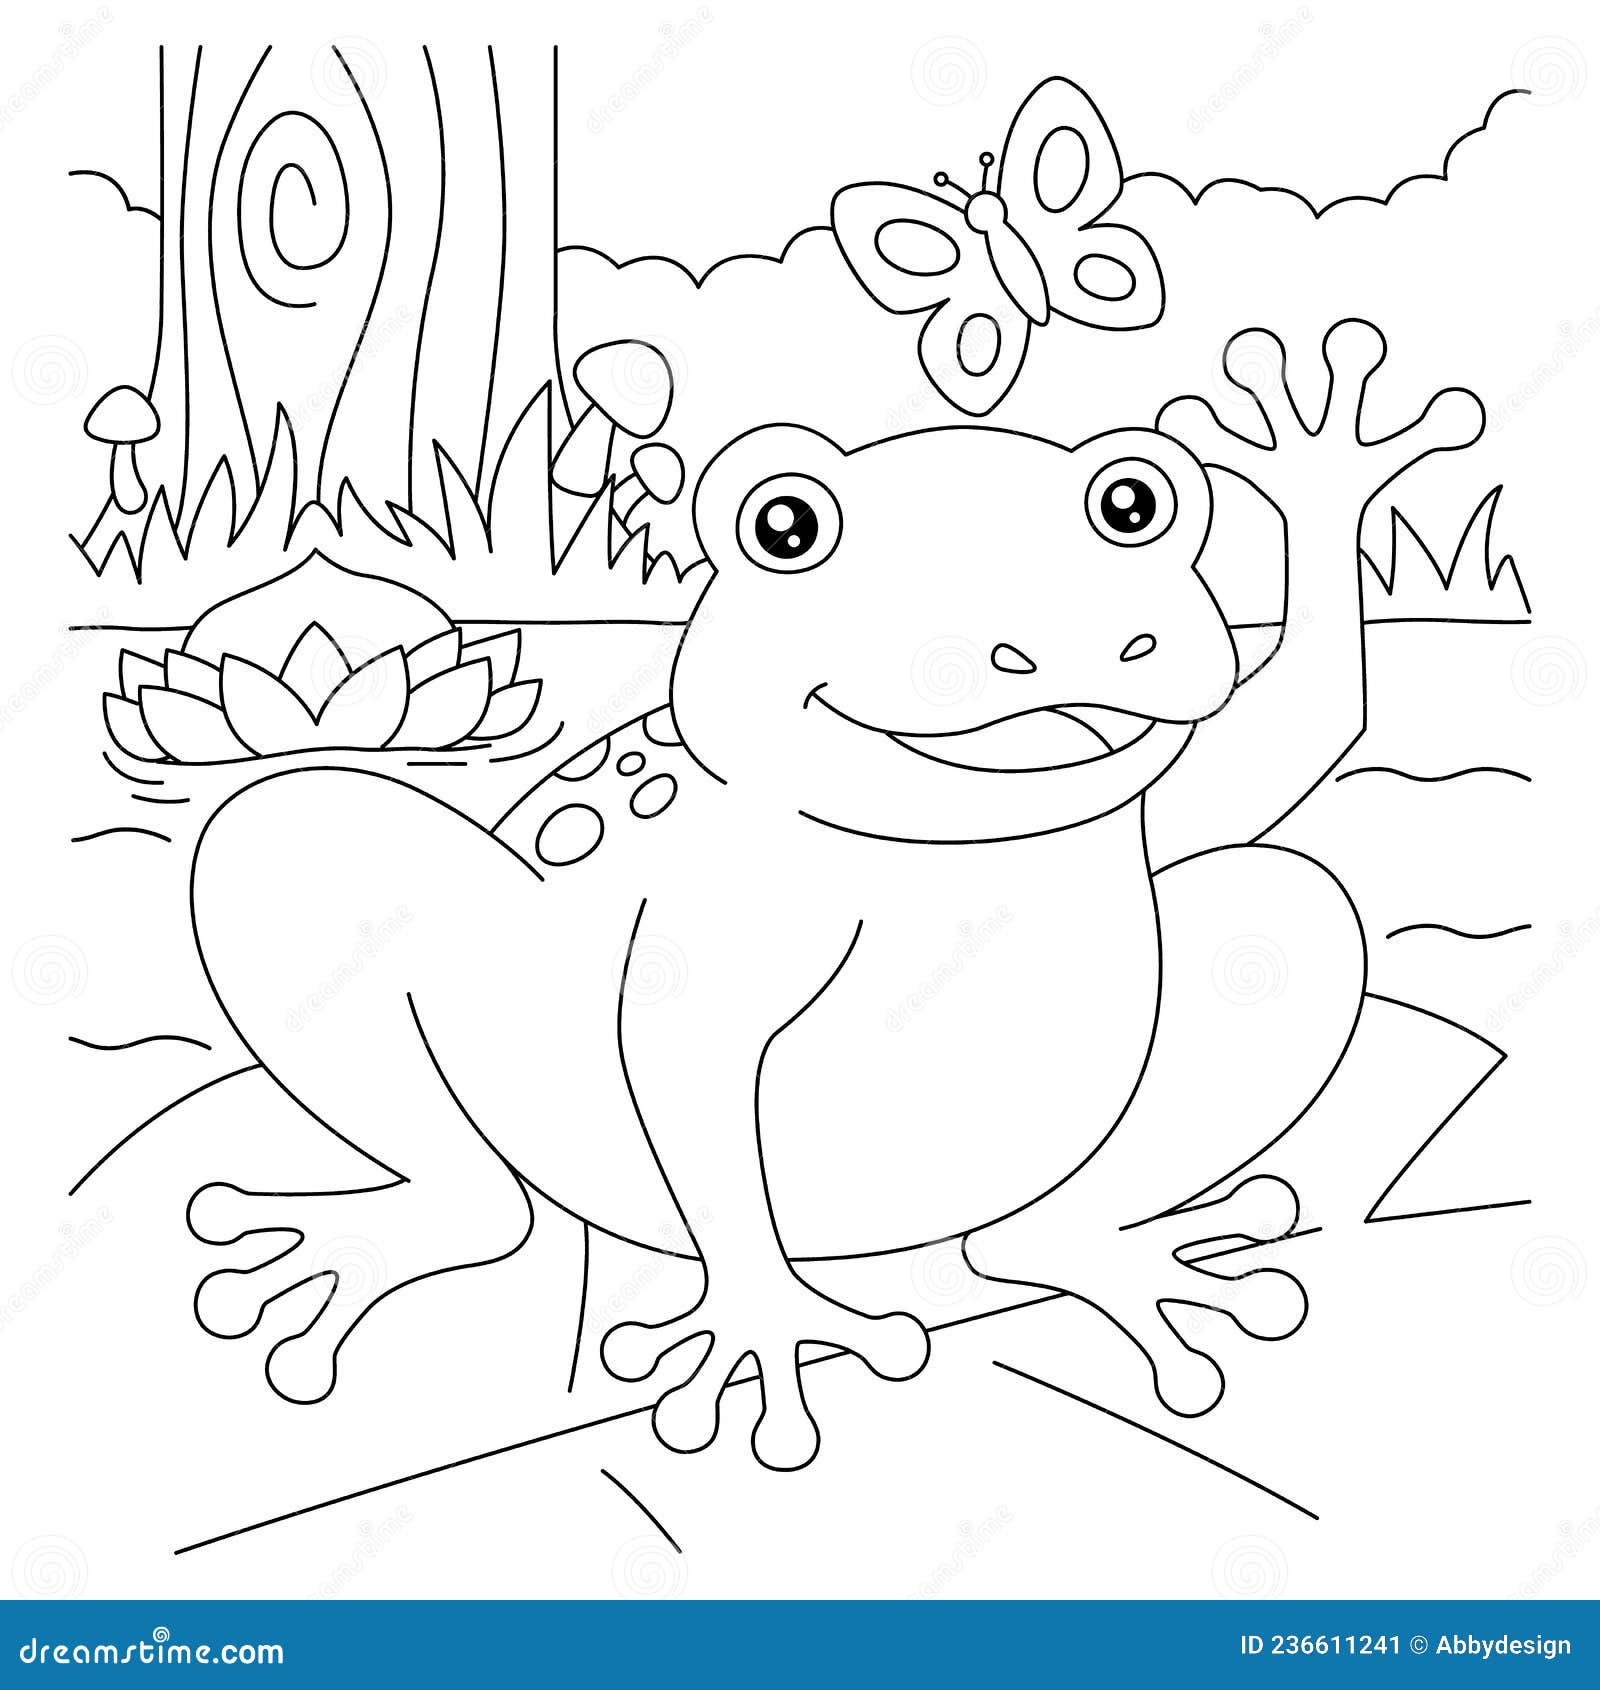 Frog coloring page for kids stock vector